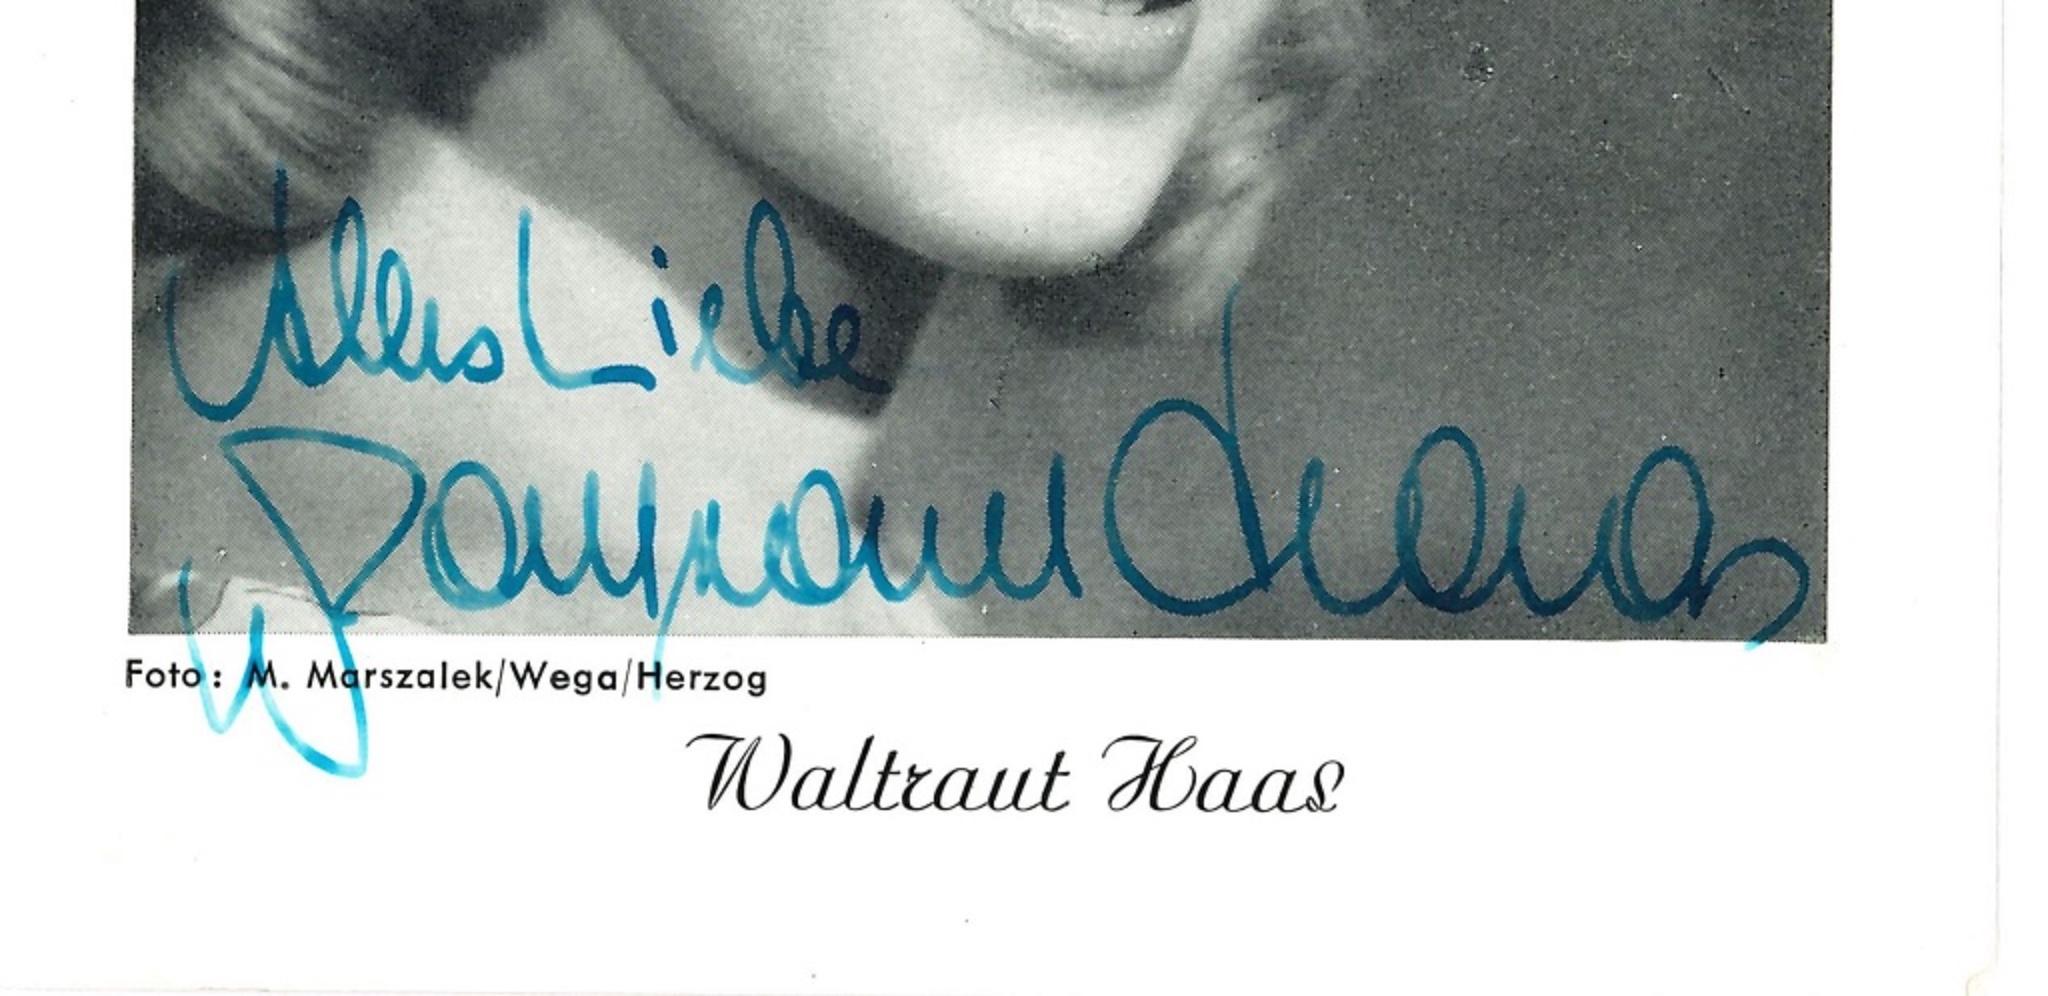 Autographed Portrait of Waltraut Haas - Vintage b/w Postcard - 1950s - Photograph by Unknown